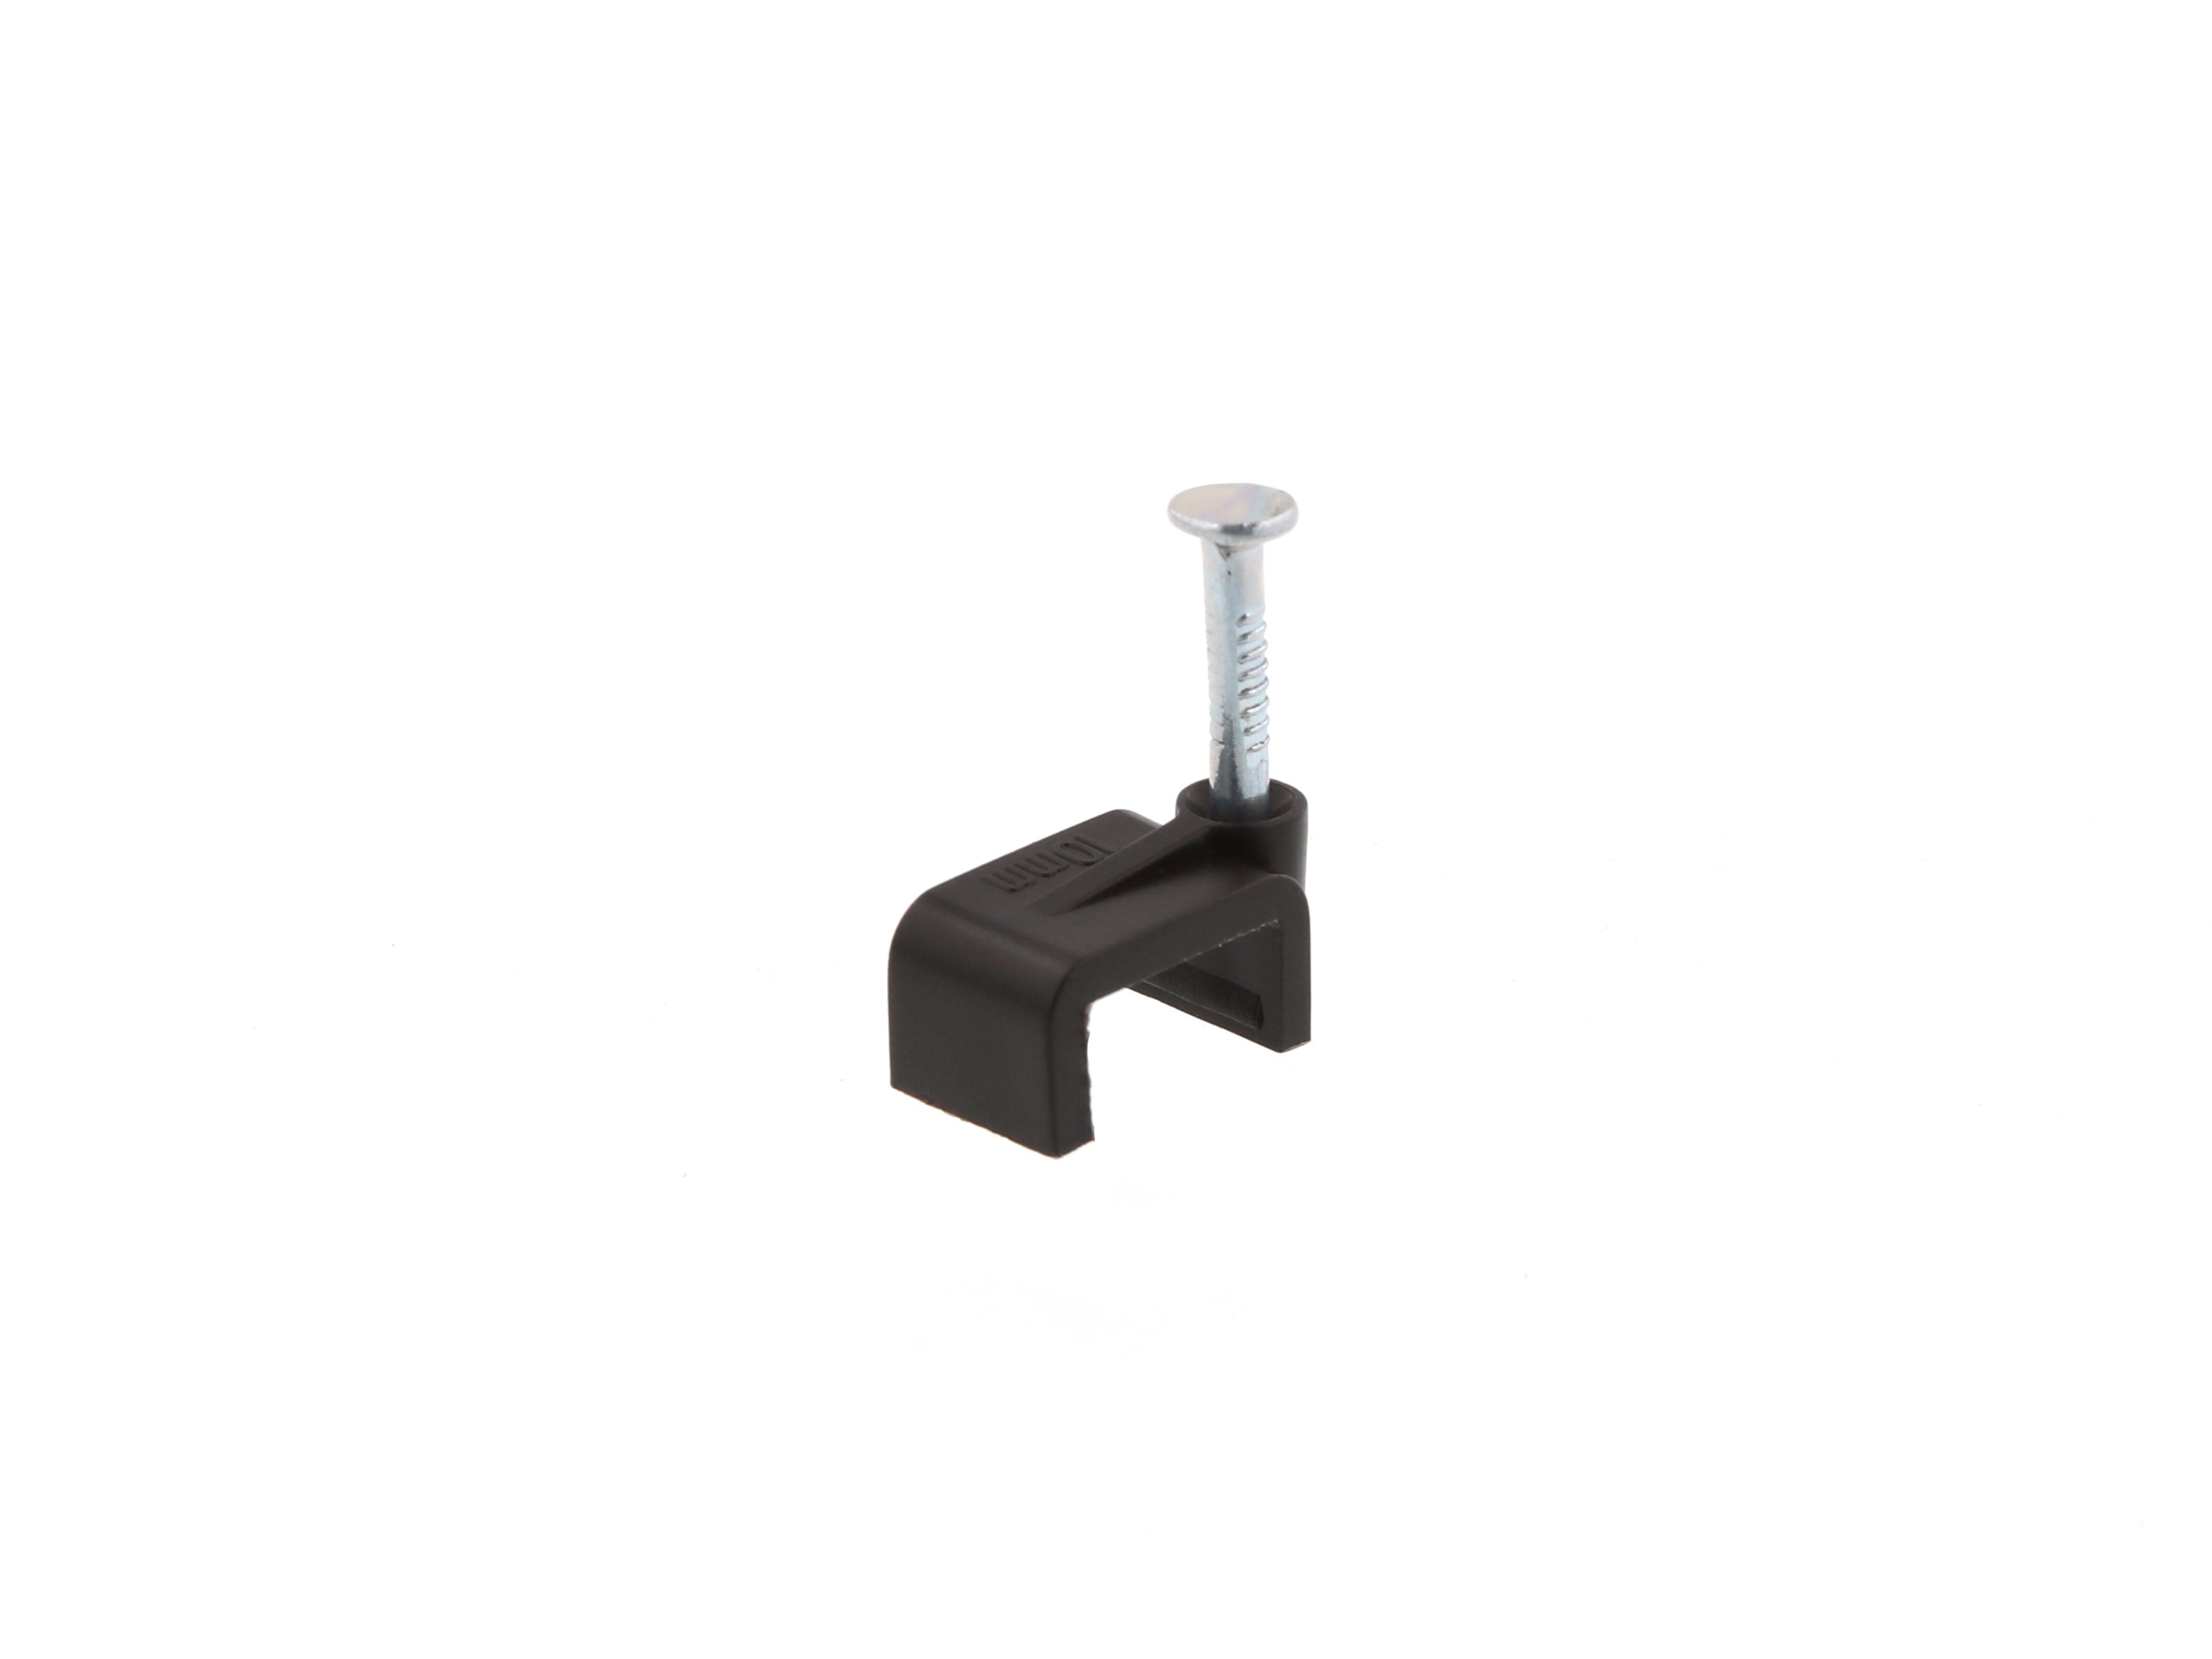 Geaccepteerd belediging Rondlopen 10mm Black Flat Nail Cable Clip - 100 Pack - Secure™ Cable Ties